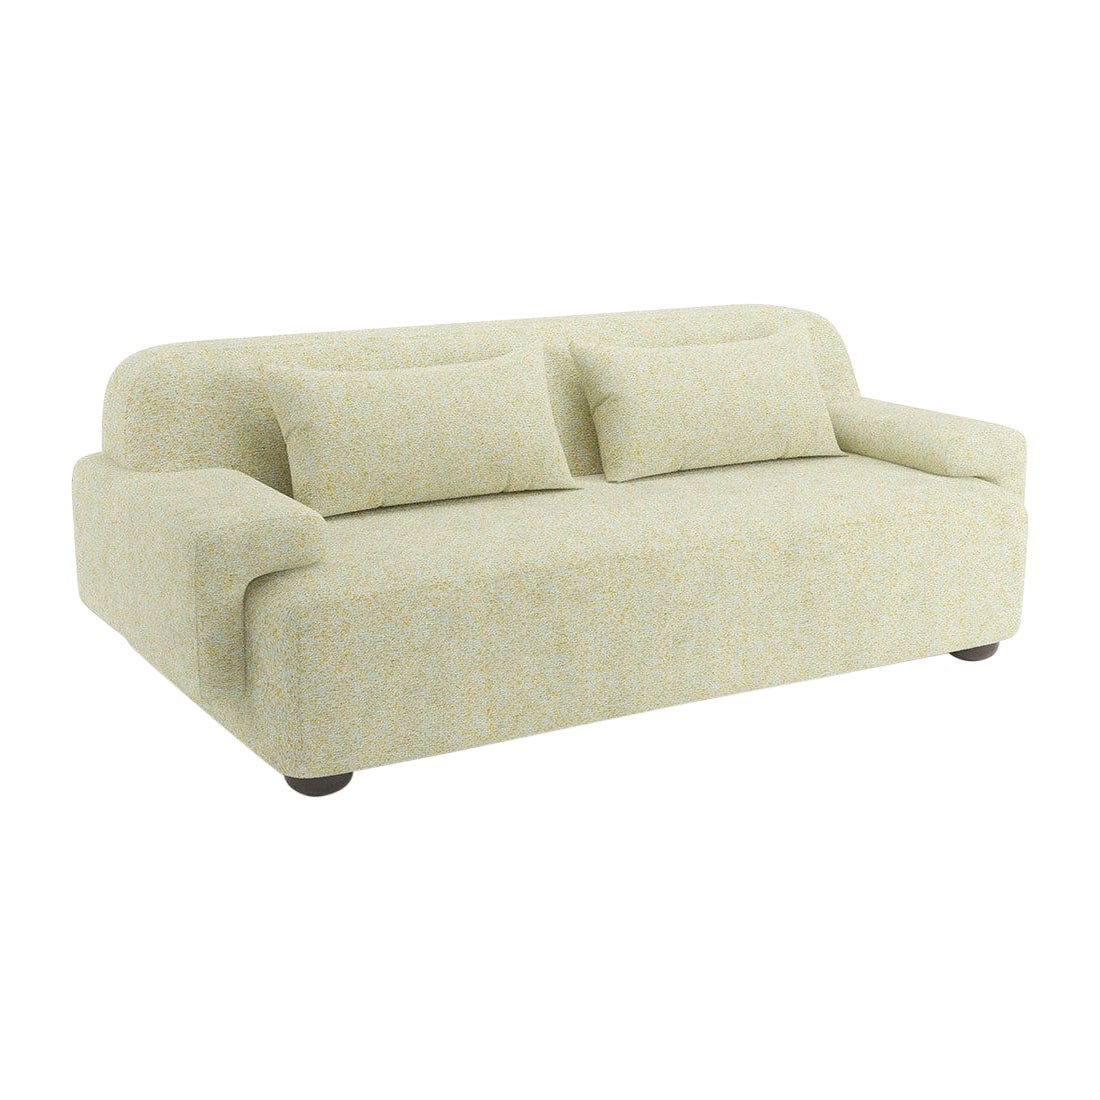 Popus Editions Lena 2.5 Seater Sofa in Sage Zanzi Linen with Wool Blend Fabric